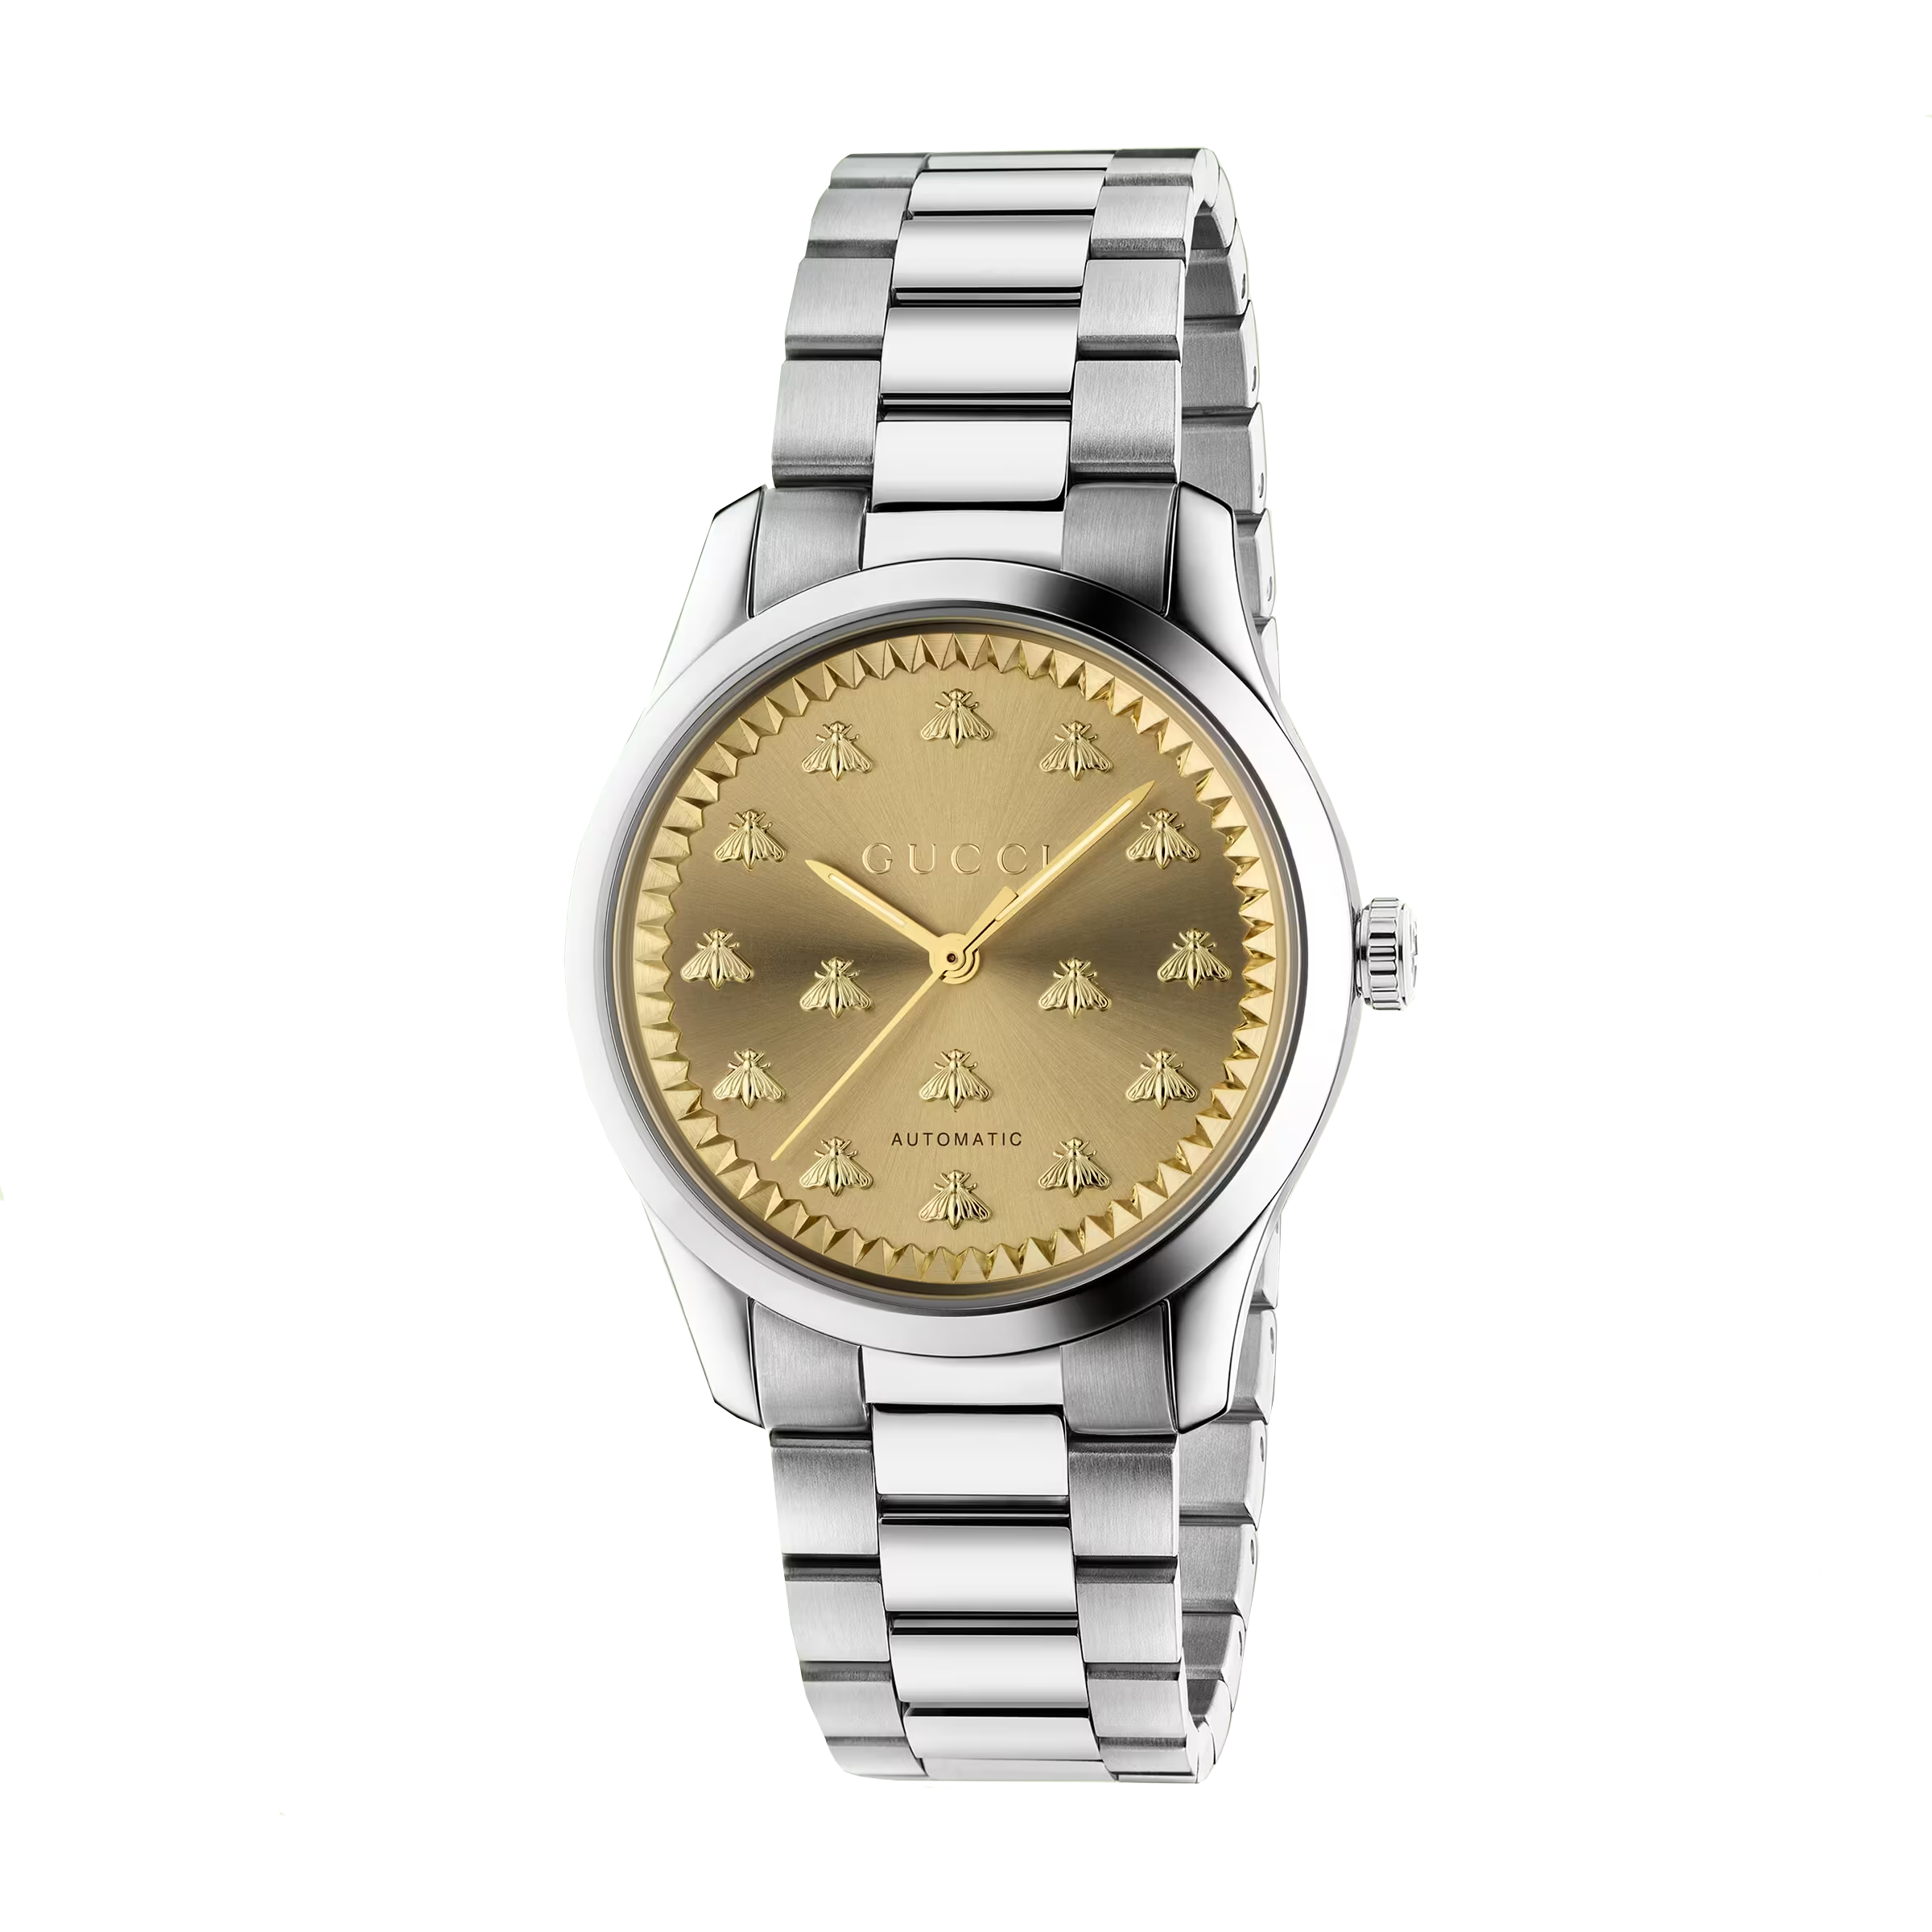 Multibee Watch with Gold Dial